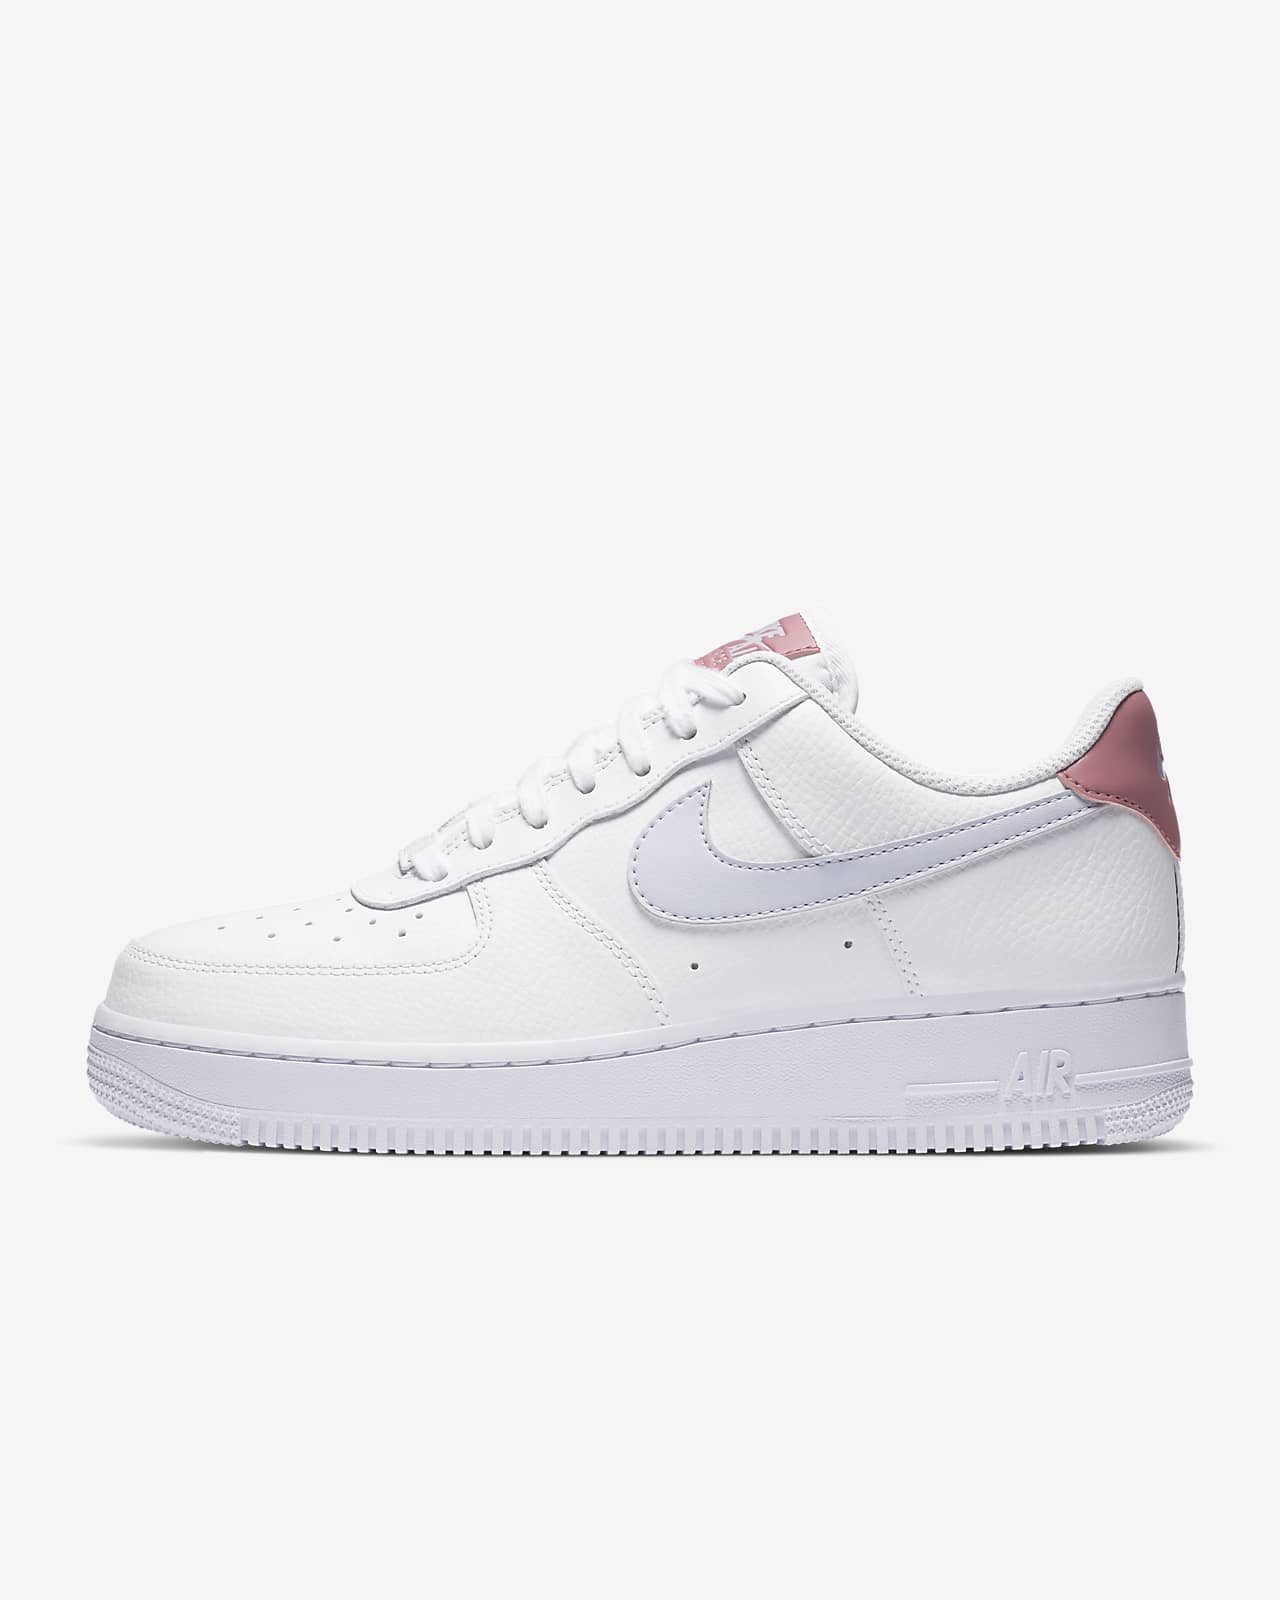 size 5 air force ones